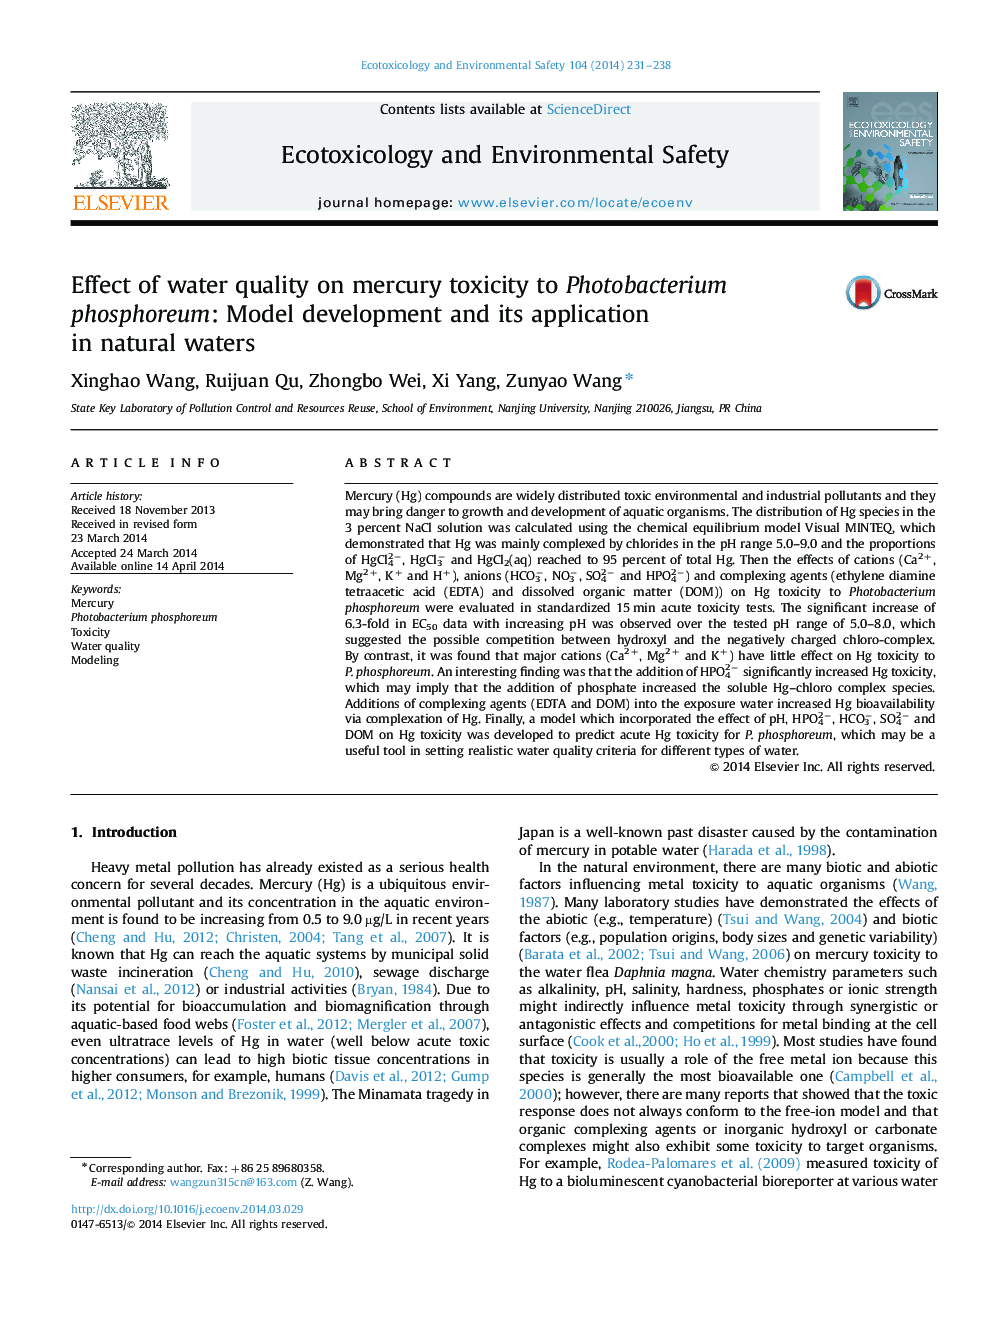 Effect of water quality on mercury toxicity to Photobacterium phosphoreum: Model development and its application in natural waters